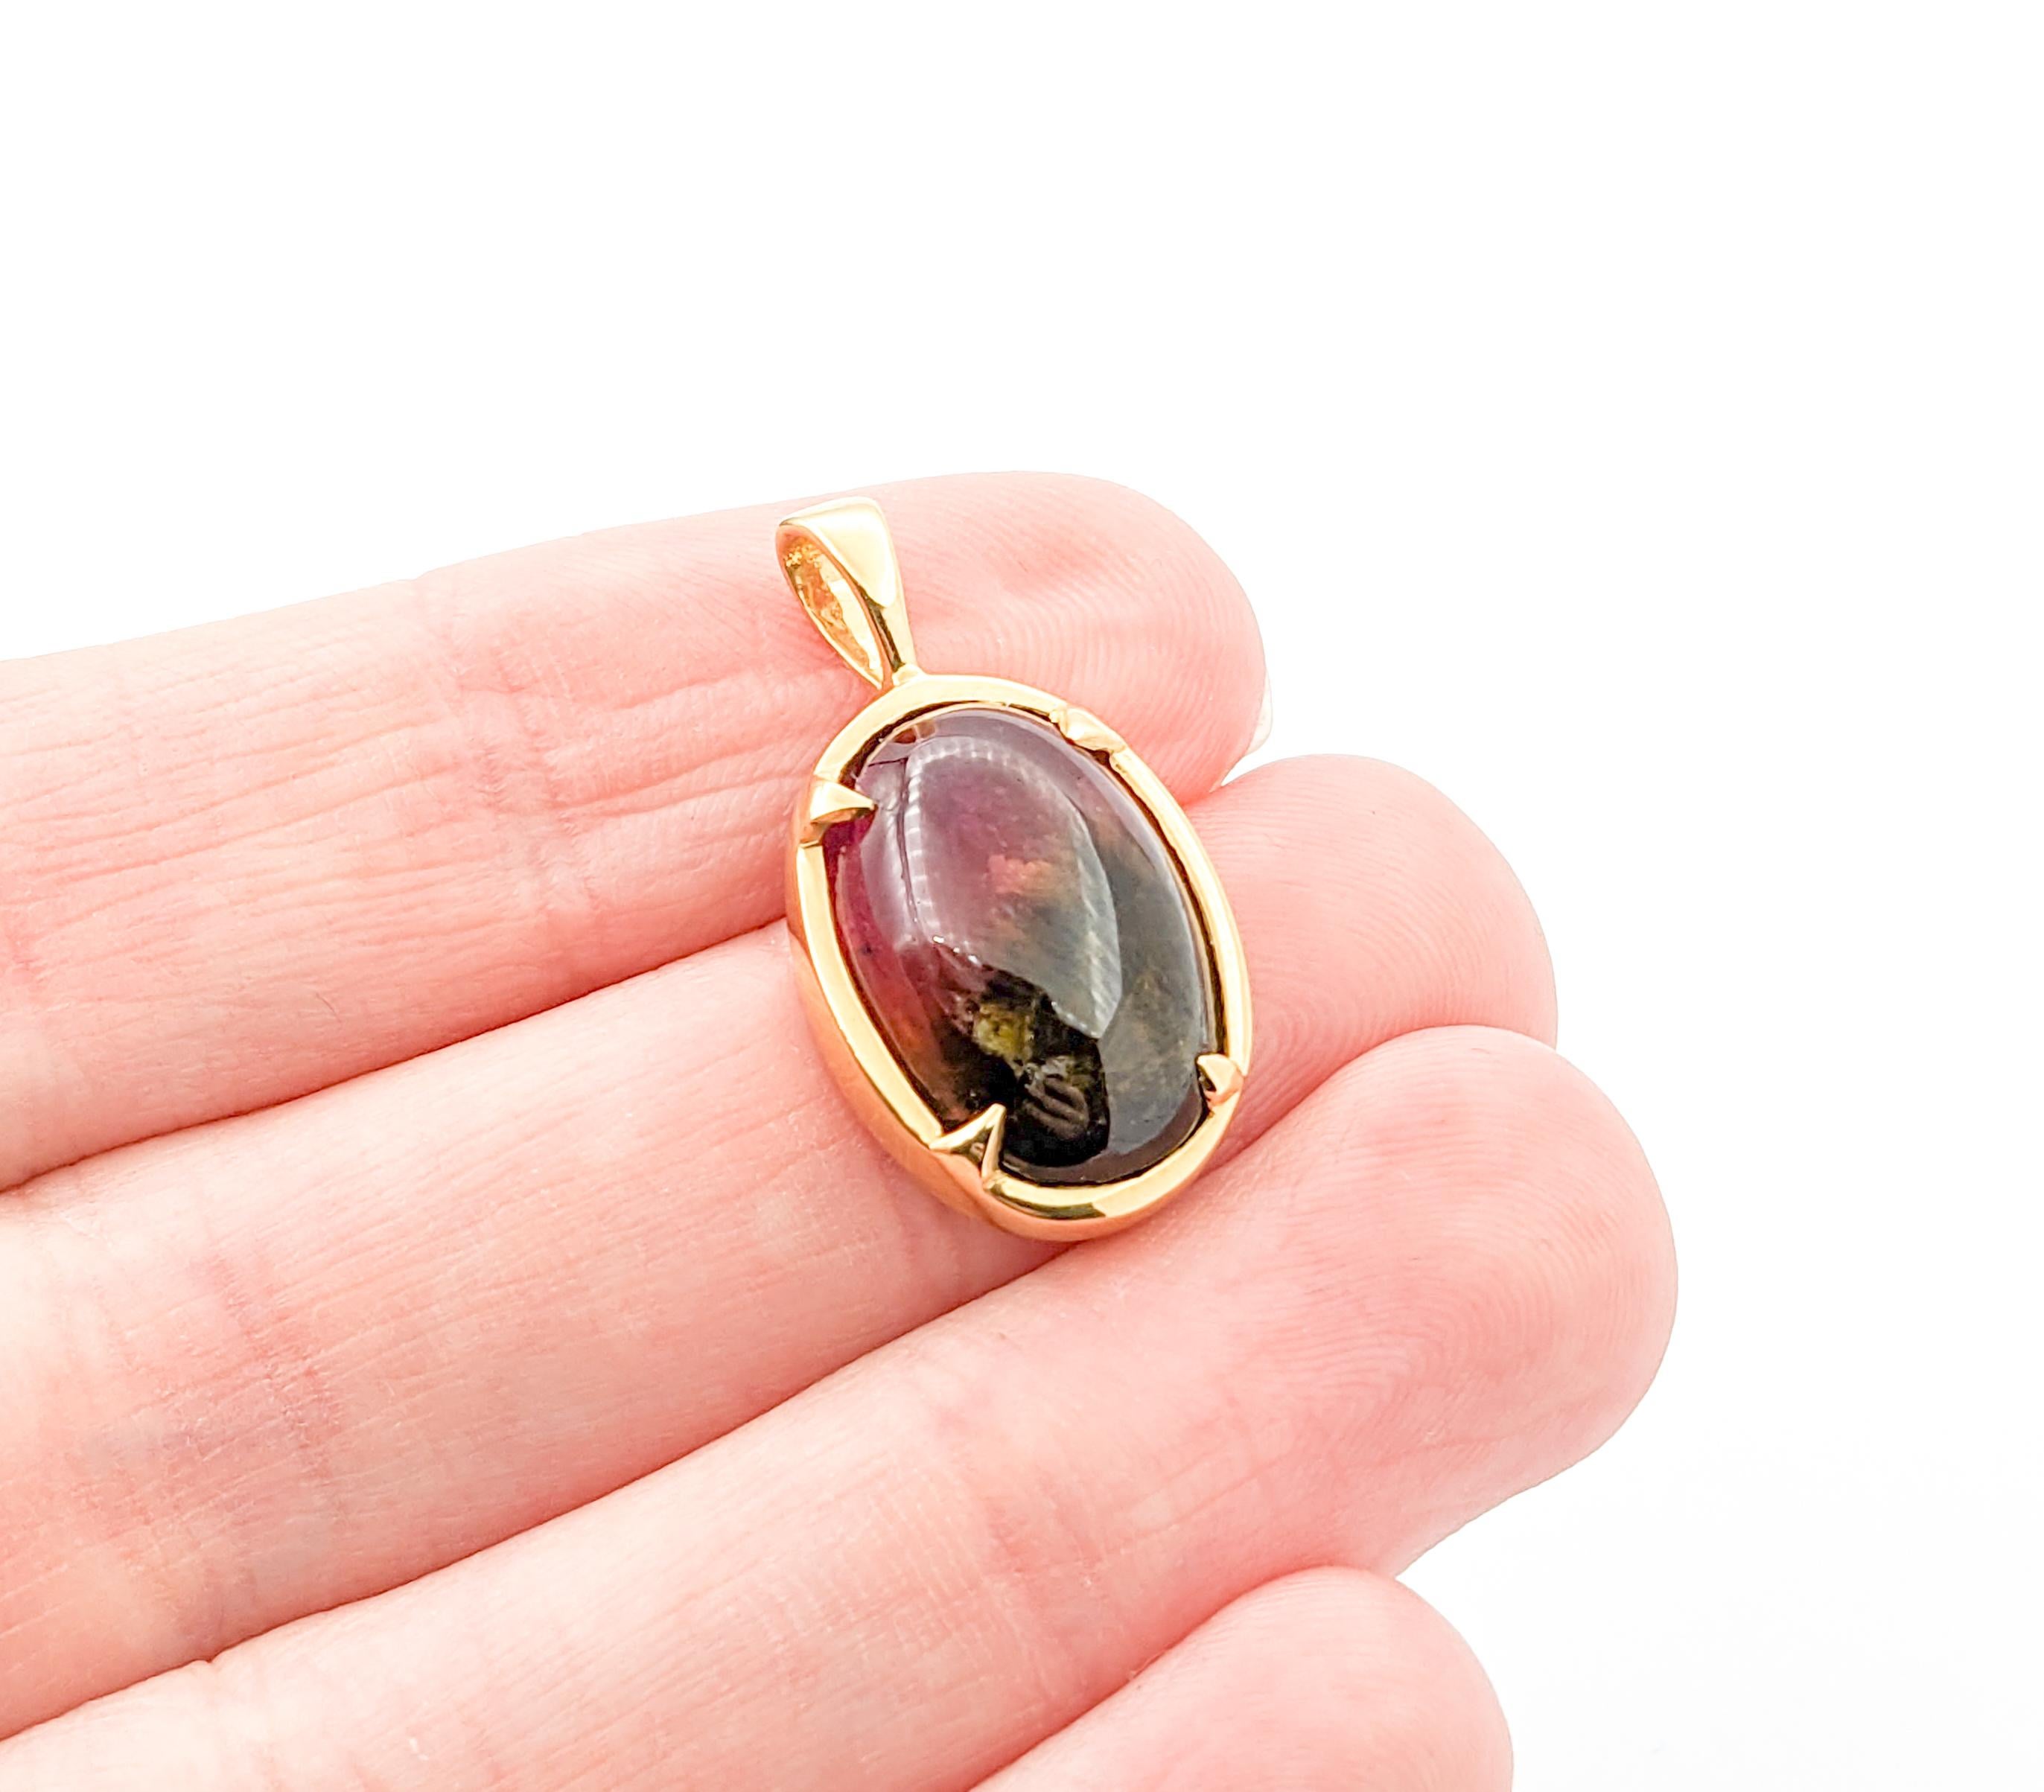 Fabulous 18k Oval Cabochon Watermelon Tourmaline Charm Pendant

Introducing our exquisite 18k yellow gold pendant, a true testament to elegance and craftsmanship. Meticulously crafted, this pendant showcases a stunning 10ct oval cabochon watermelon